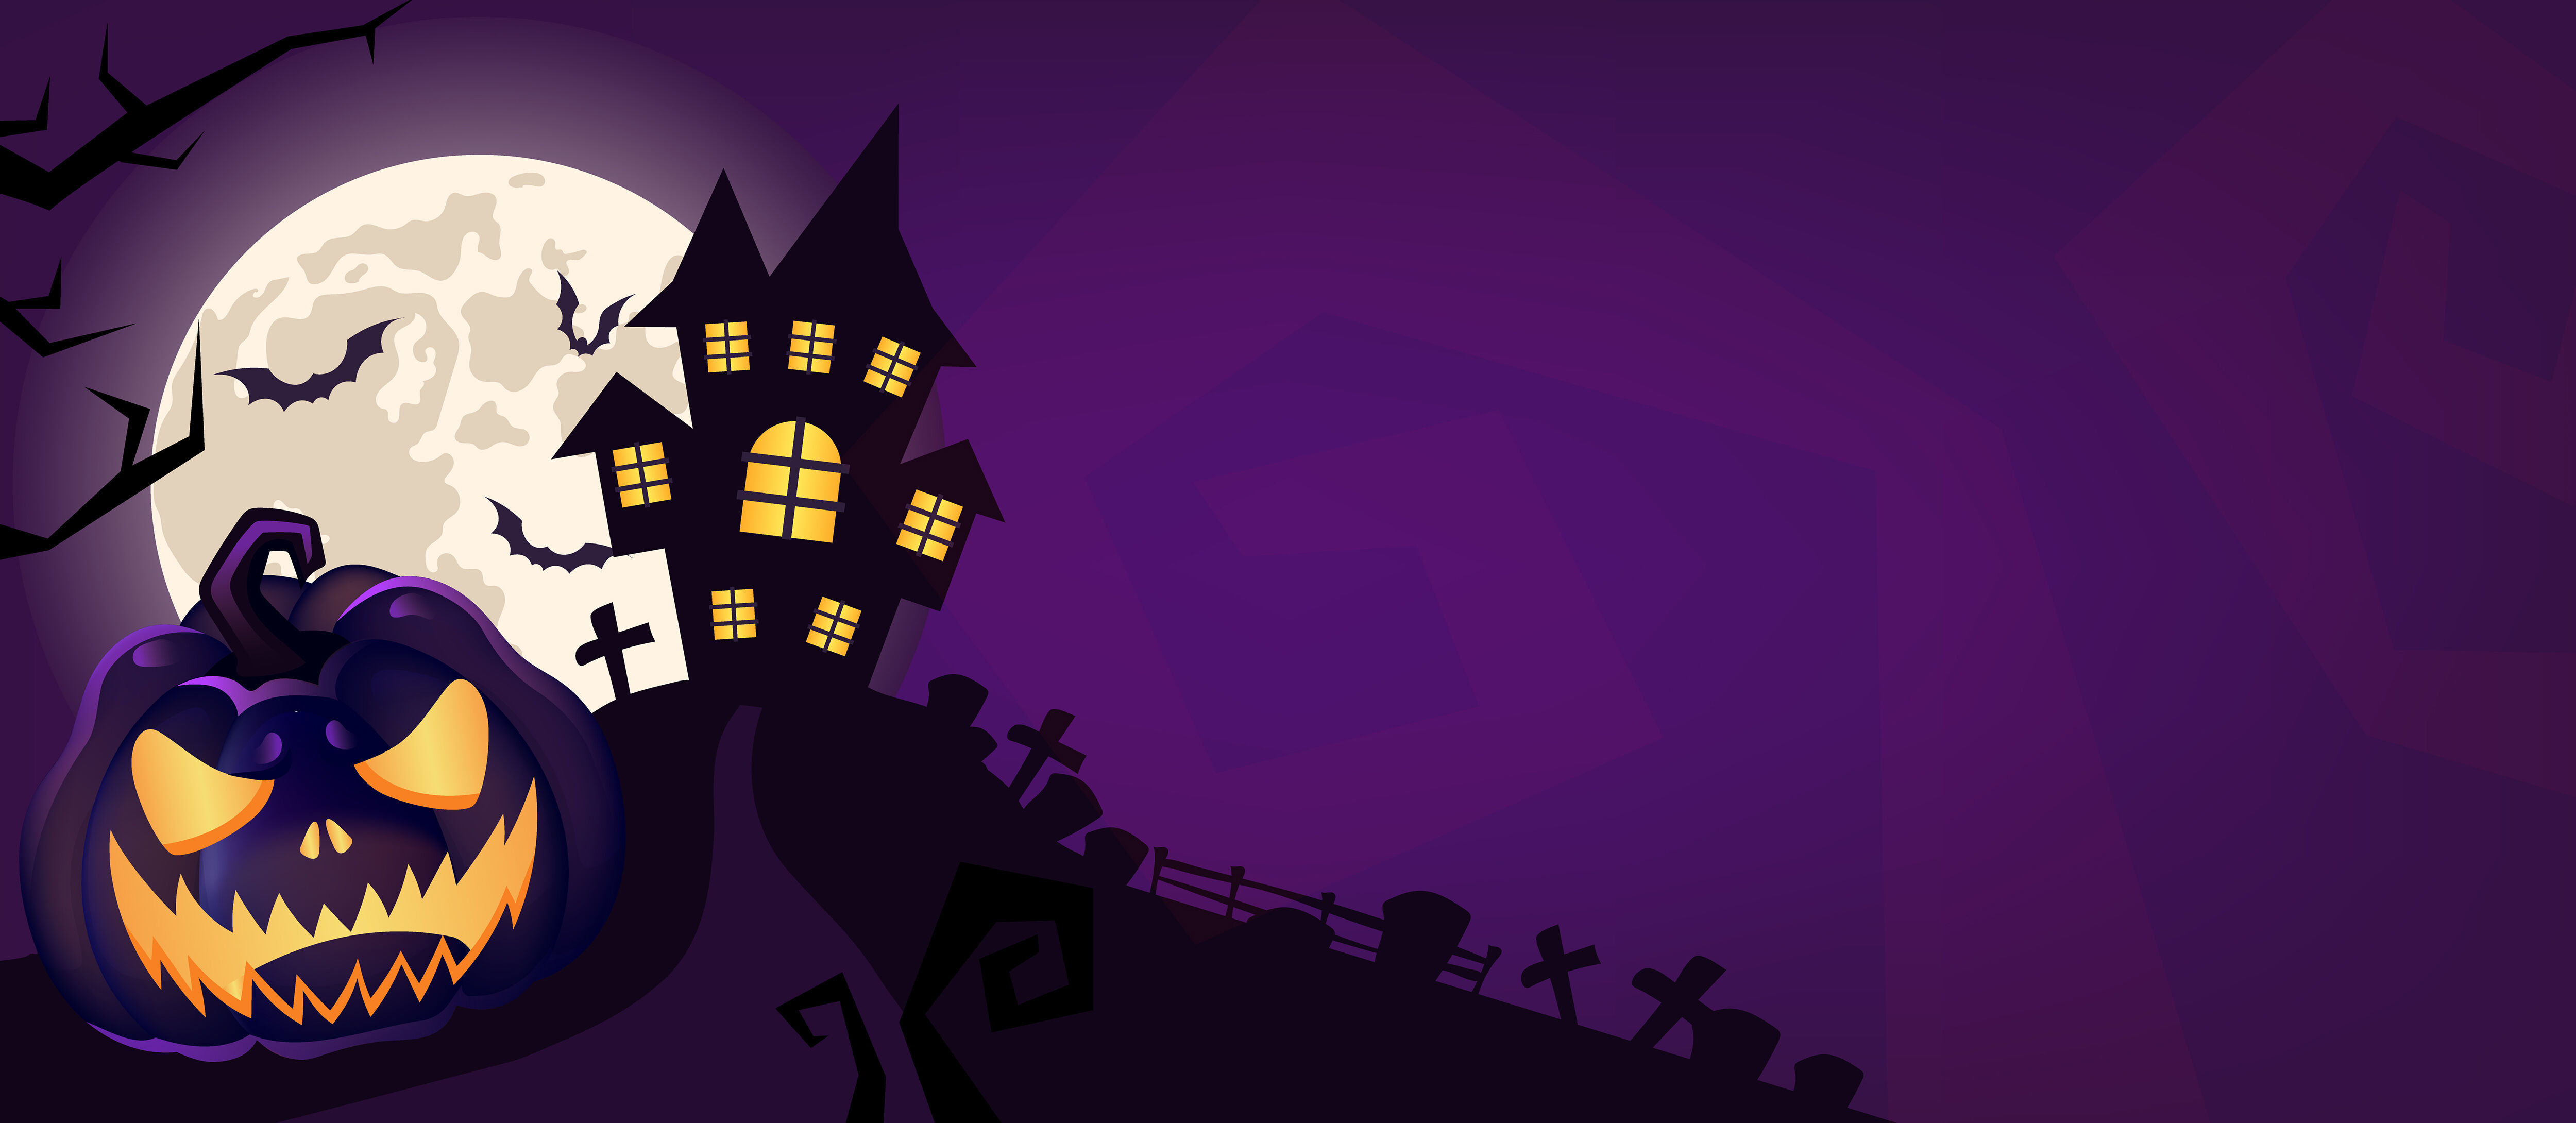 Spectacular Halloween background purple Photos, Footage, and Updates